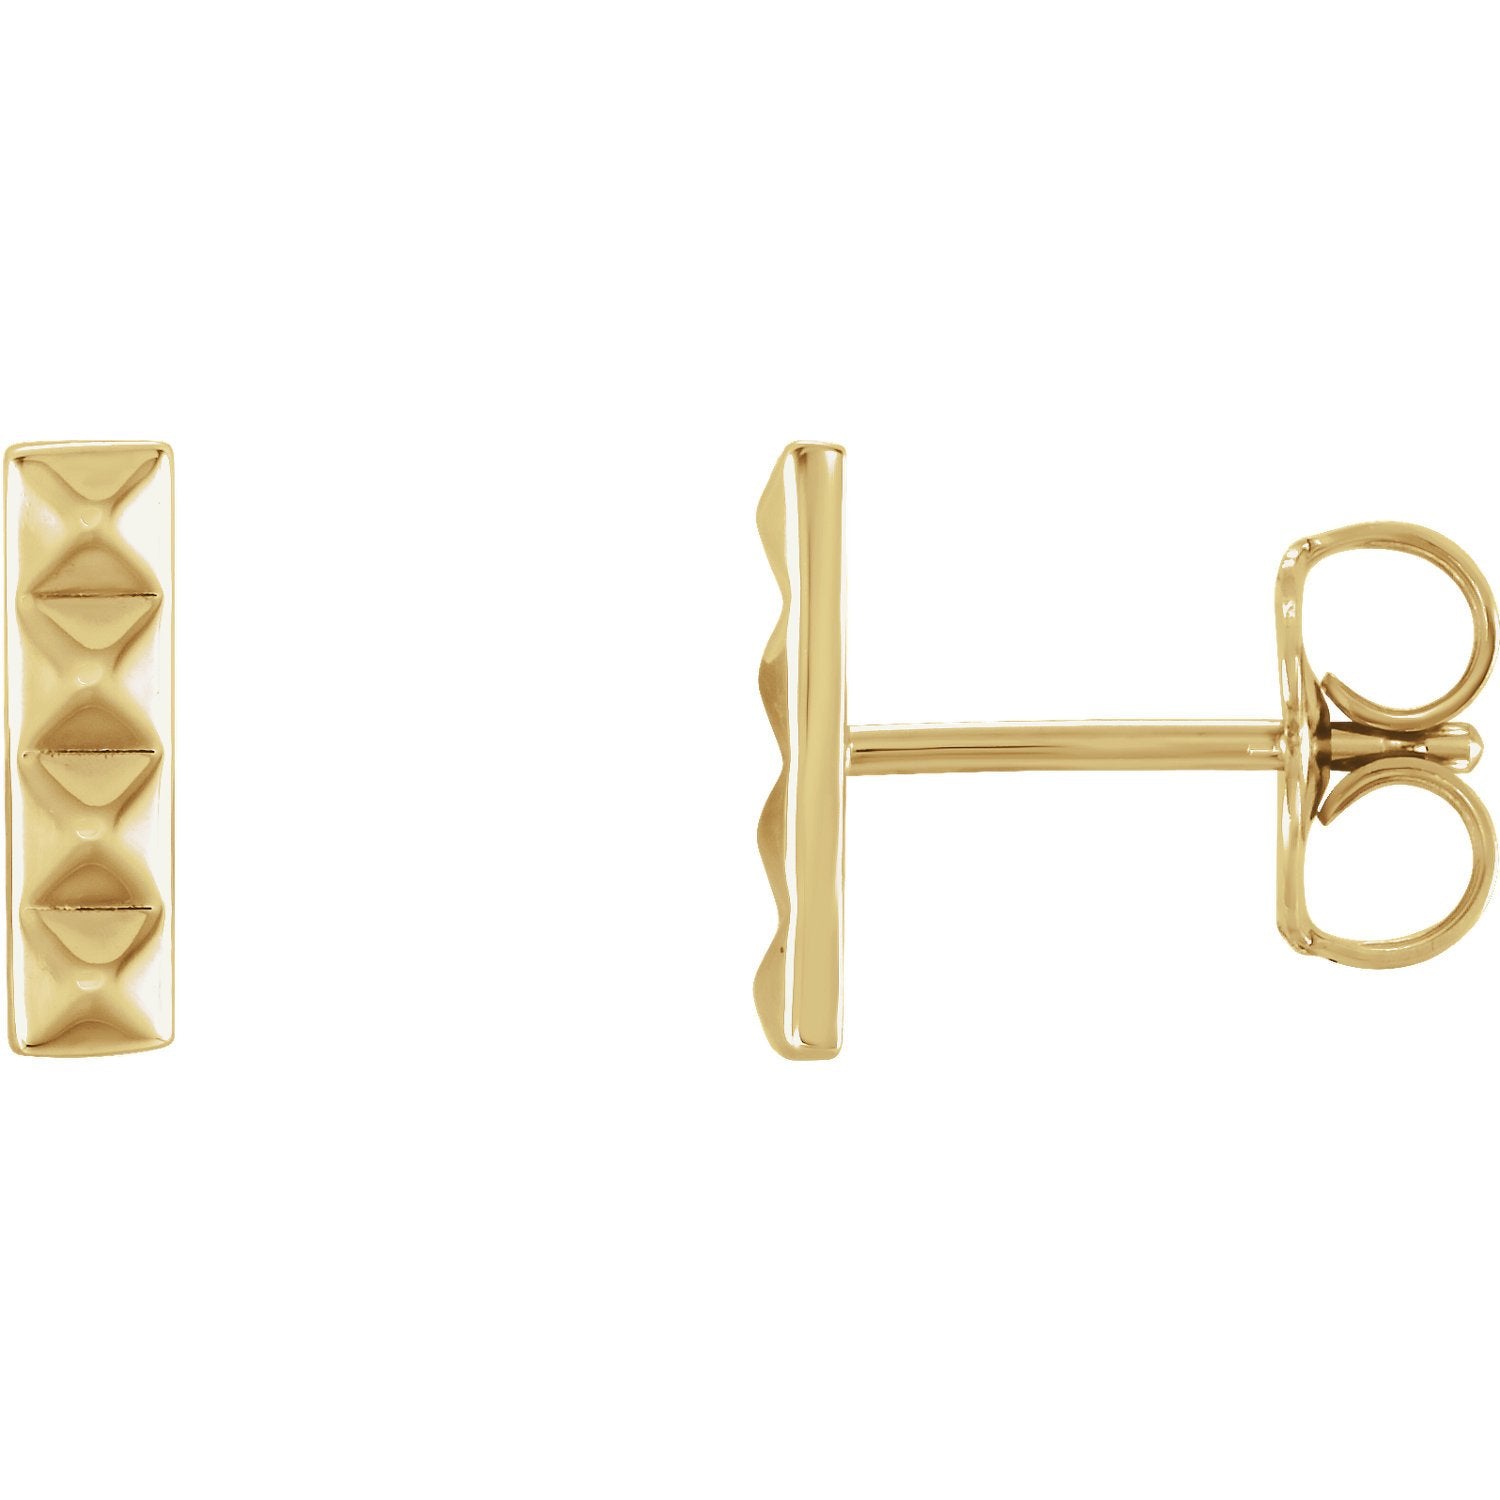 Small Pyramid Bar Earrings - 14k Gold (Y, W or R), Platinum or Sterling Silver